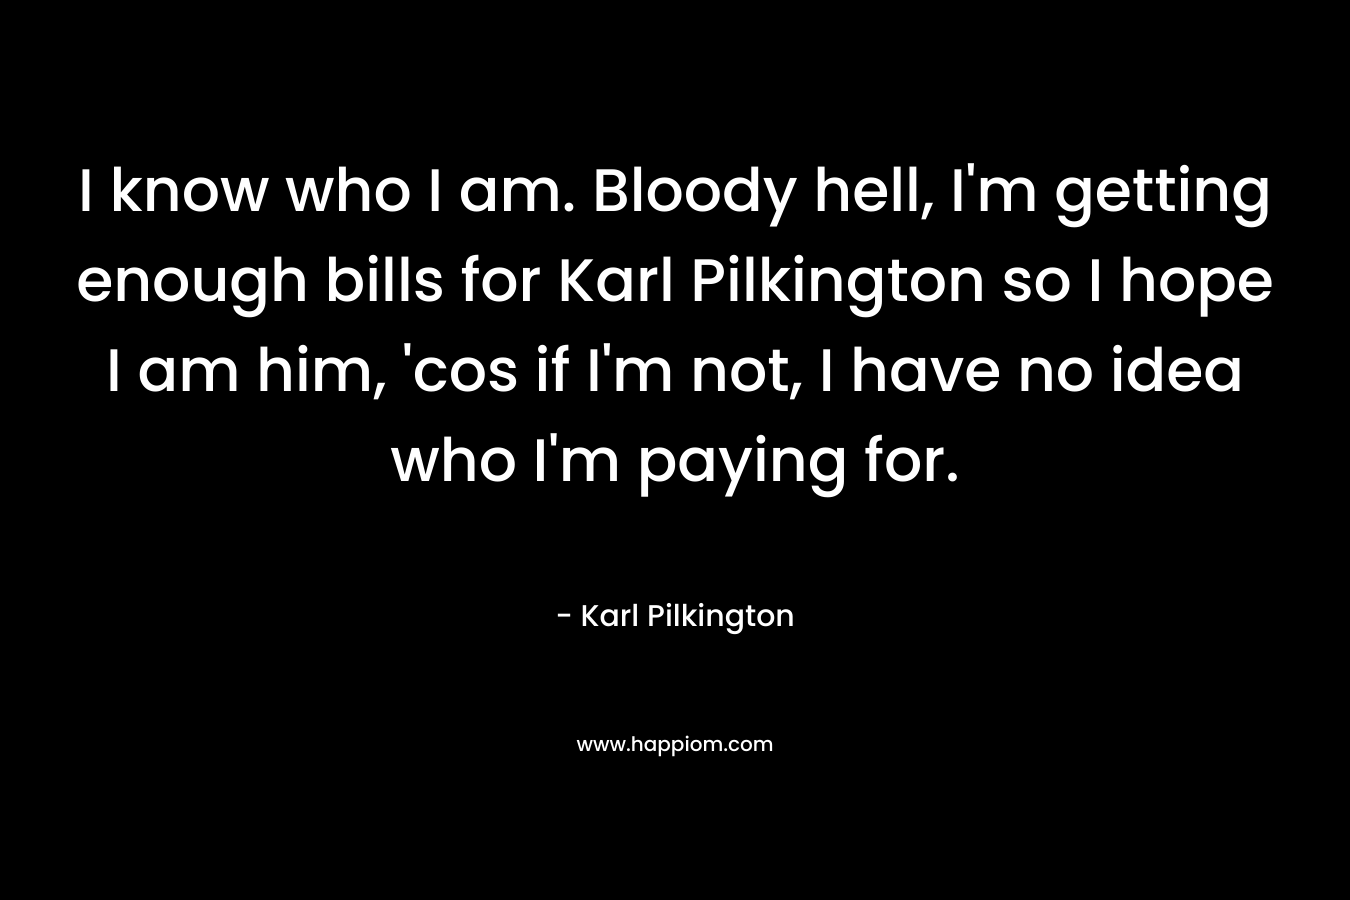 I know who I am. Bloody hell, I'm getting enough bills for Karl Pilkington so I hope I am him, 'cos if I'm not, I have no idea who I'm paying for.